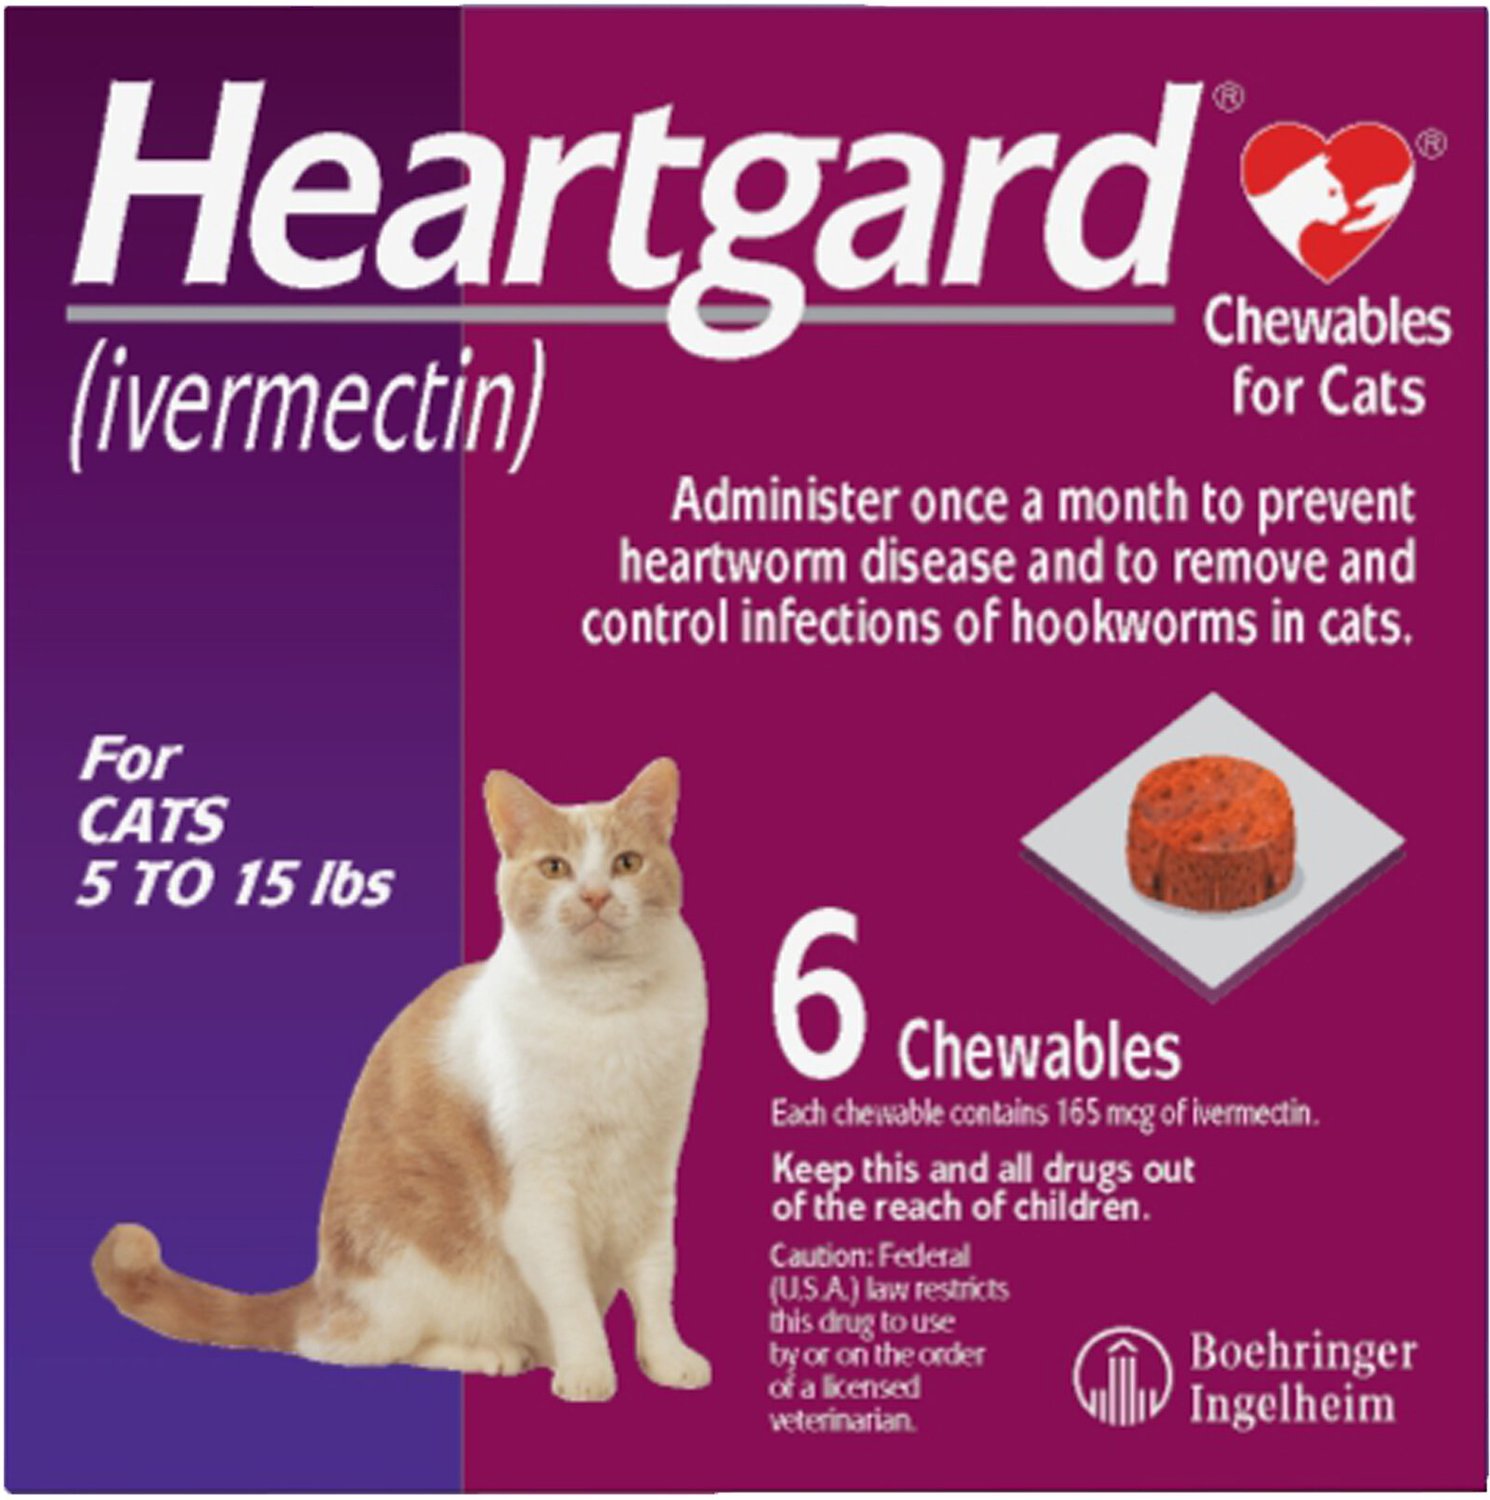 HEARTGARD Chewable Tablet for Cats, 515 lbs, (Purple Box), 6 Soft